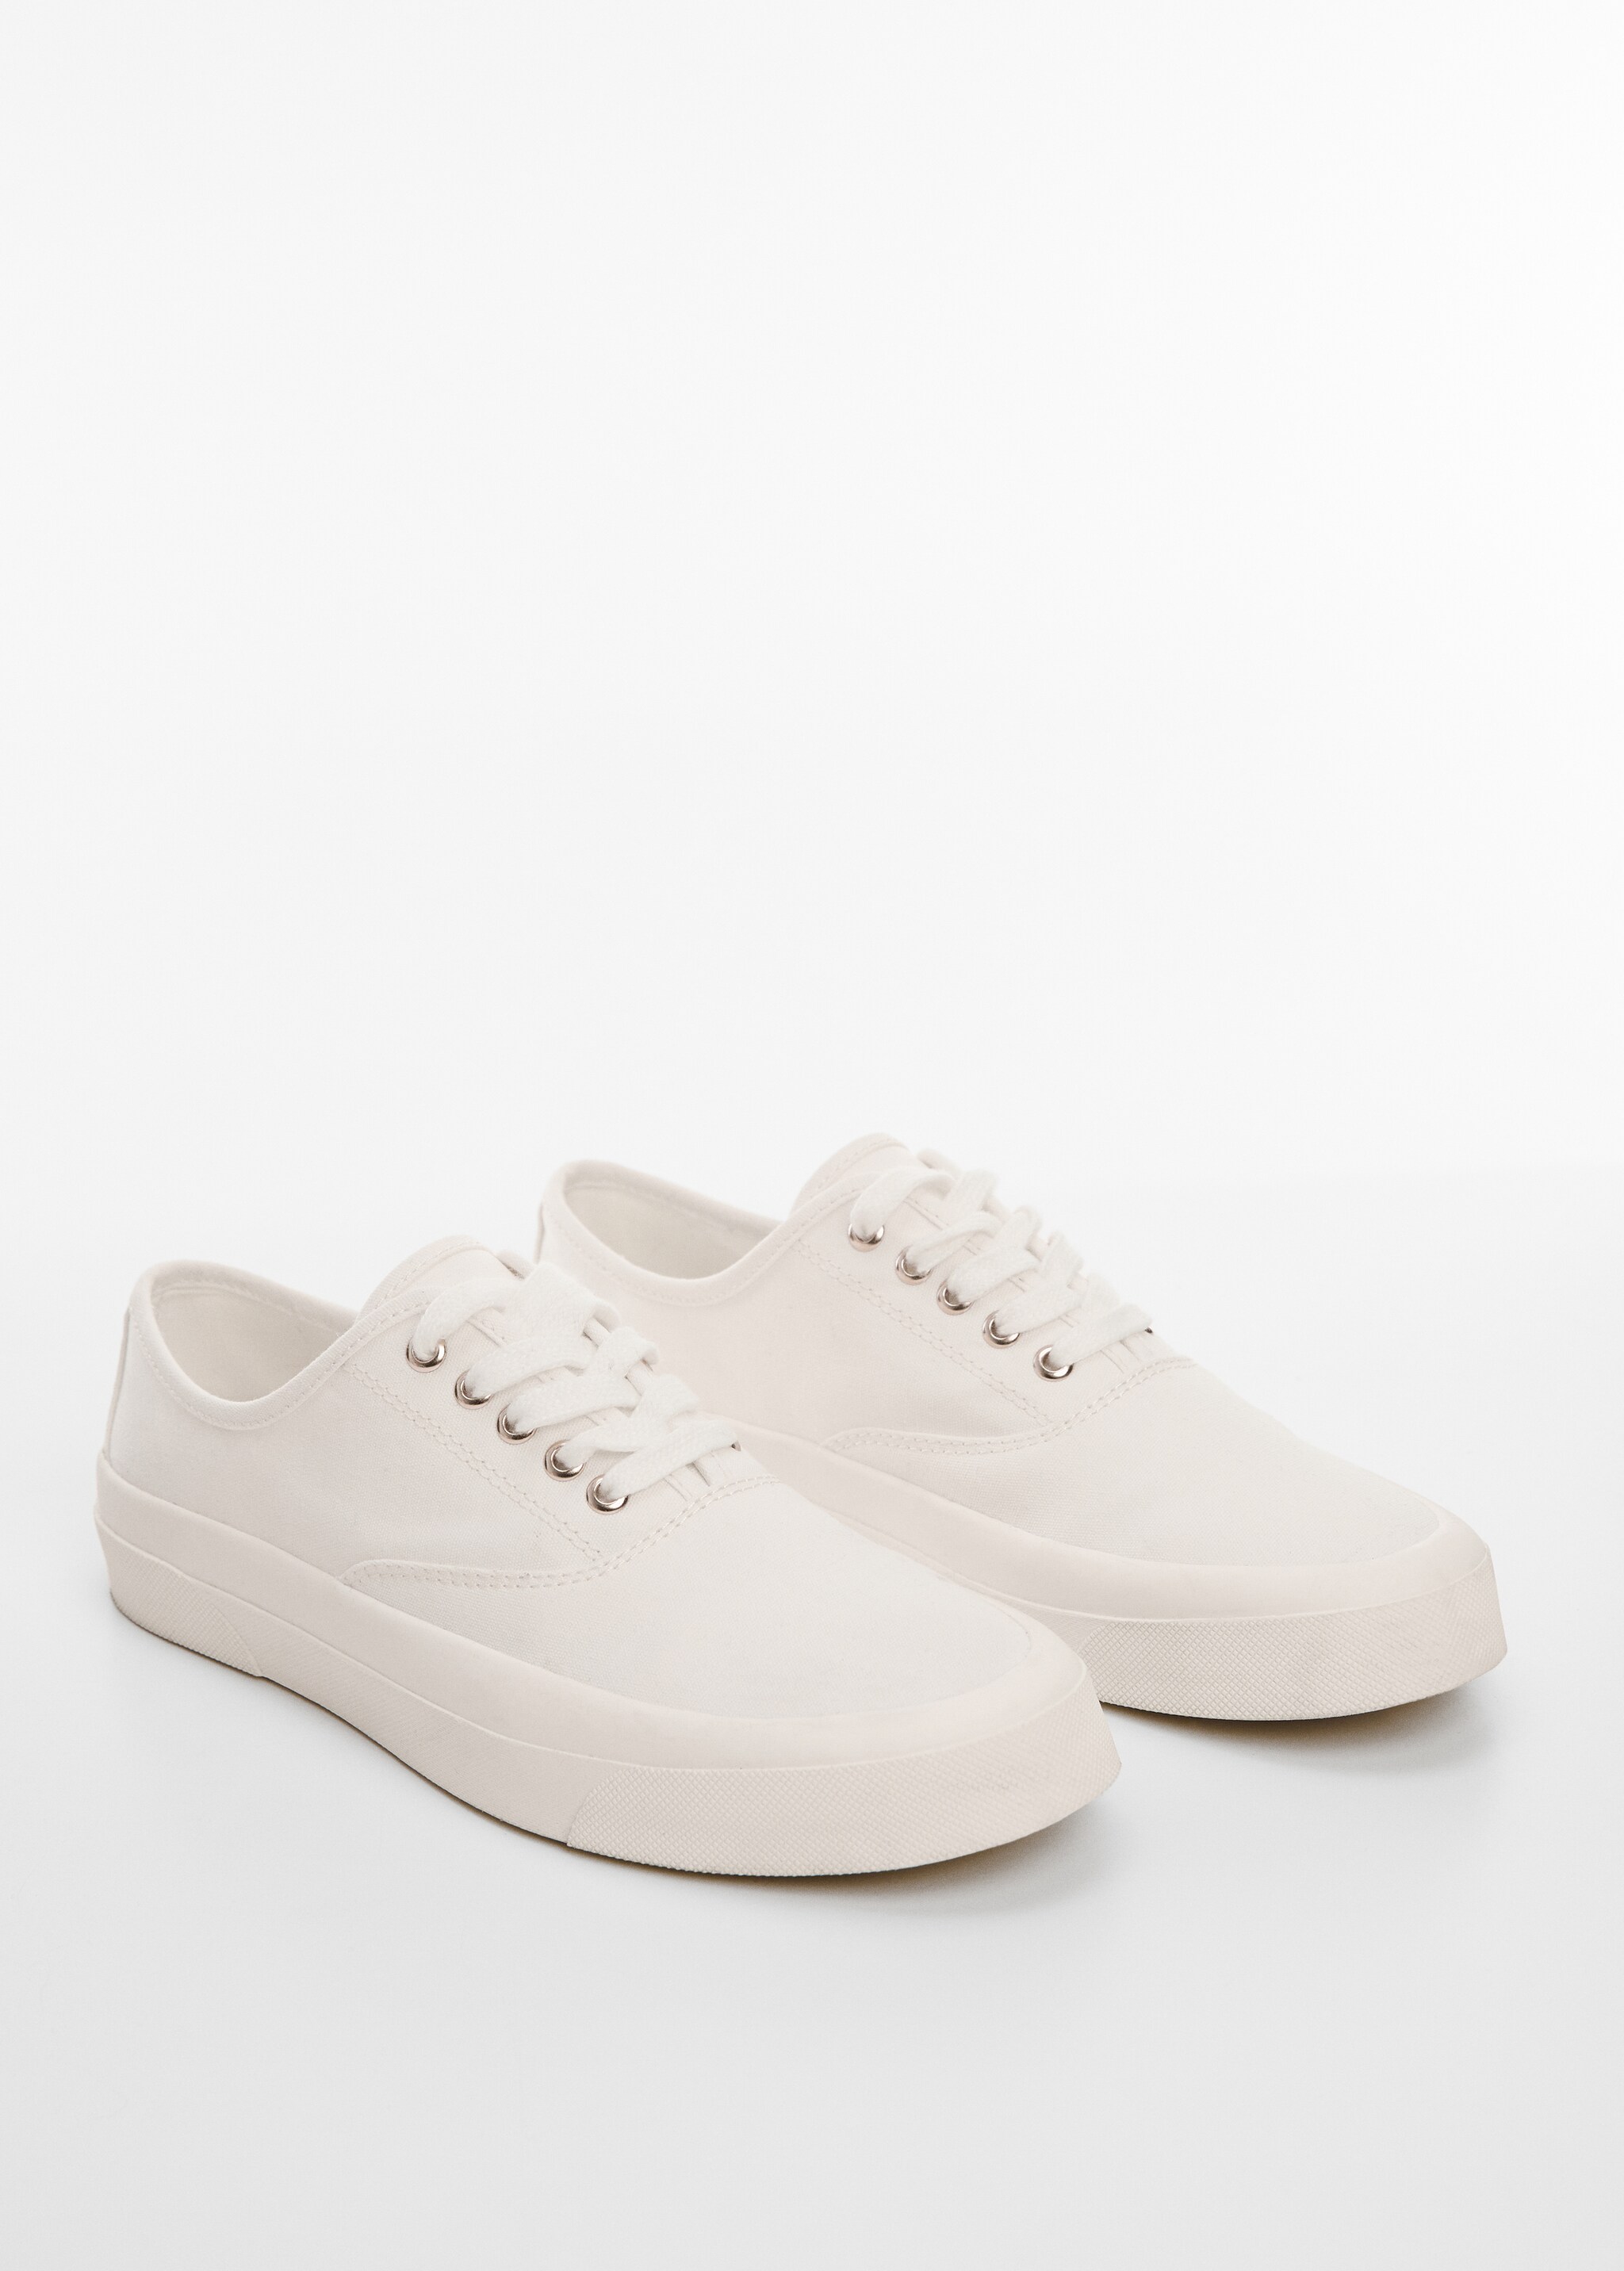 Canvas laced sneakers - Medium plane